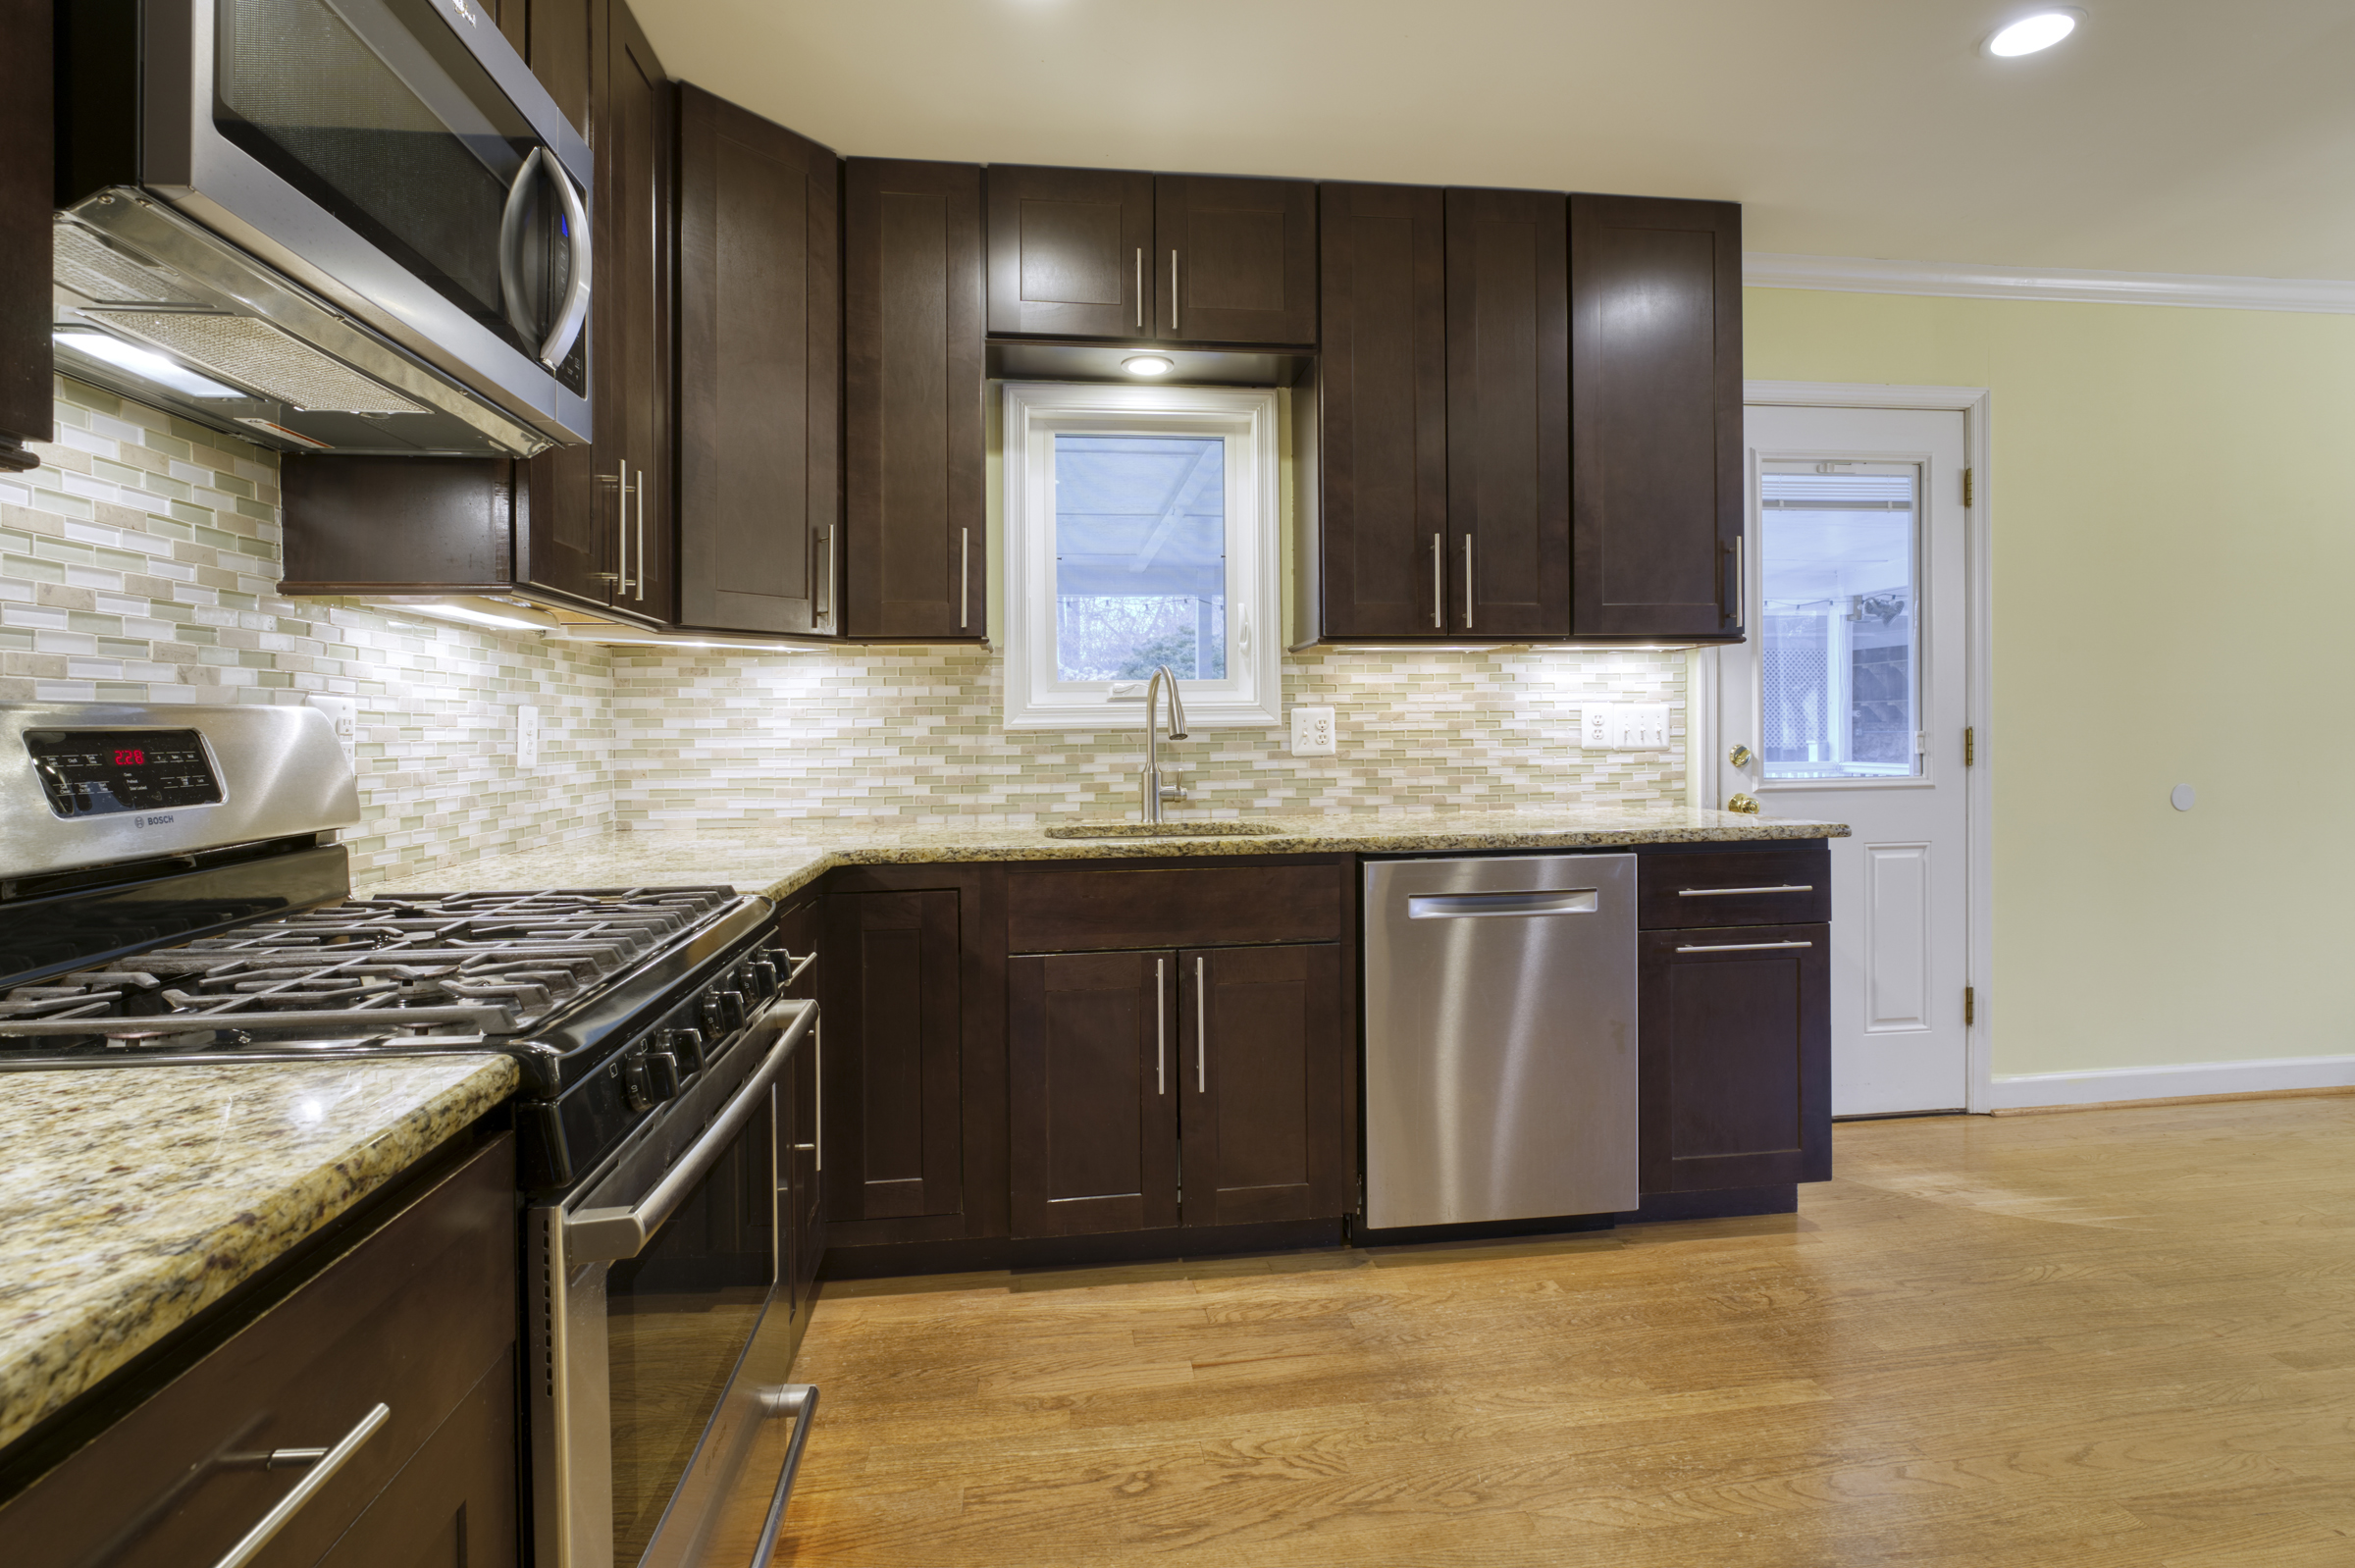 Professional interior photo of 2624 Depaul Dr in Vienna, VA - showing the remodeled kitchen with dark cabinets, stainless pulls, stainless appliances, gas range, and granite counters 